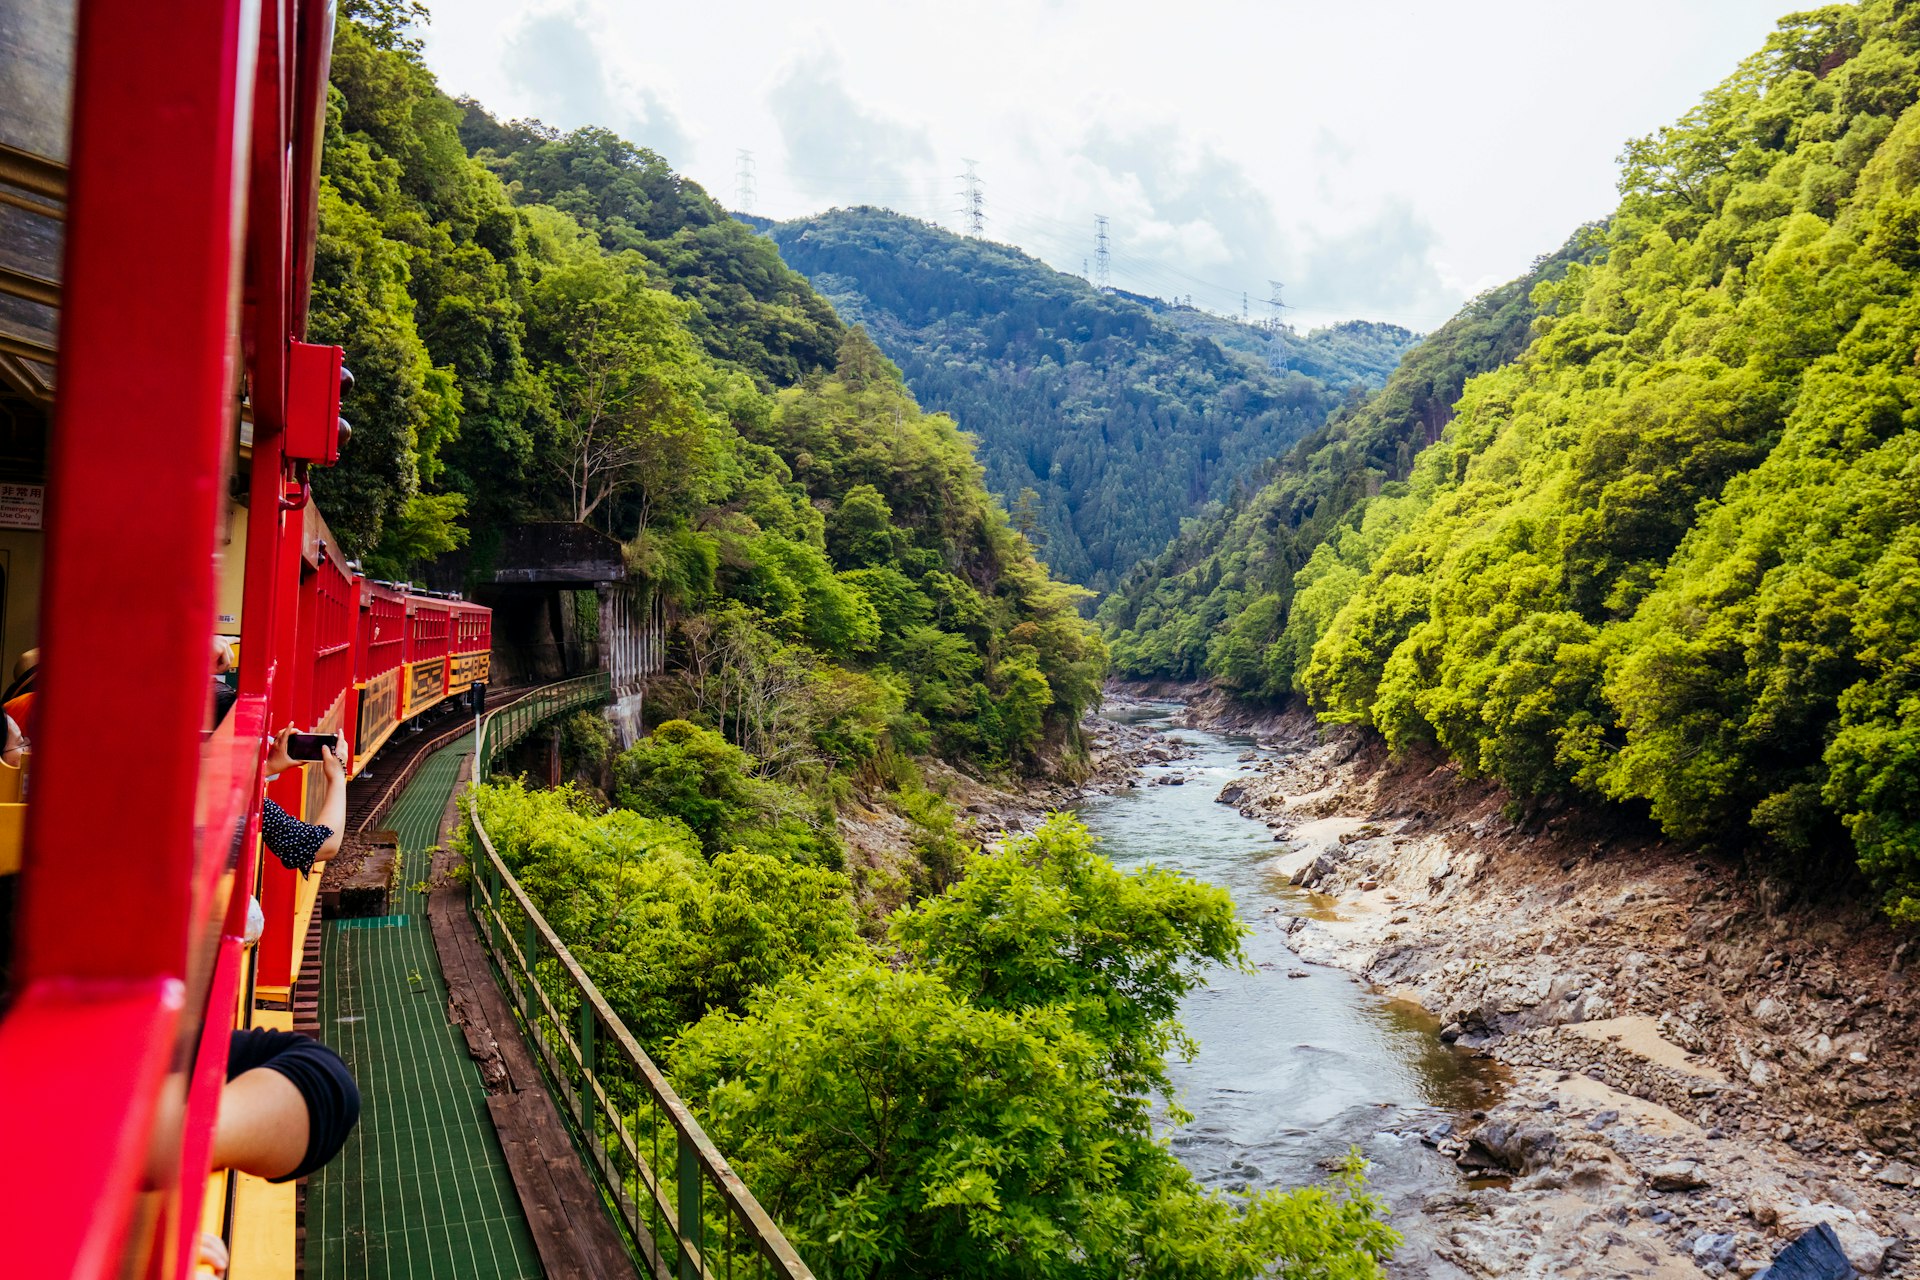 The world-famous Sagano Romantic Train running along the gorge formed by the Katsura River near Kyoto, Japan 